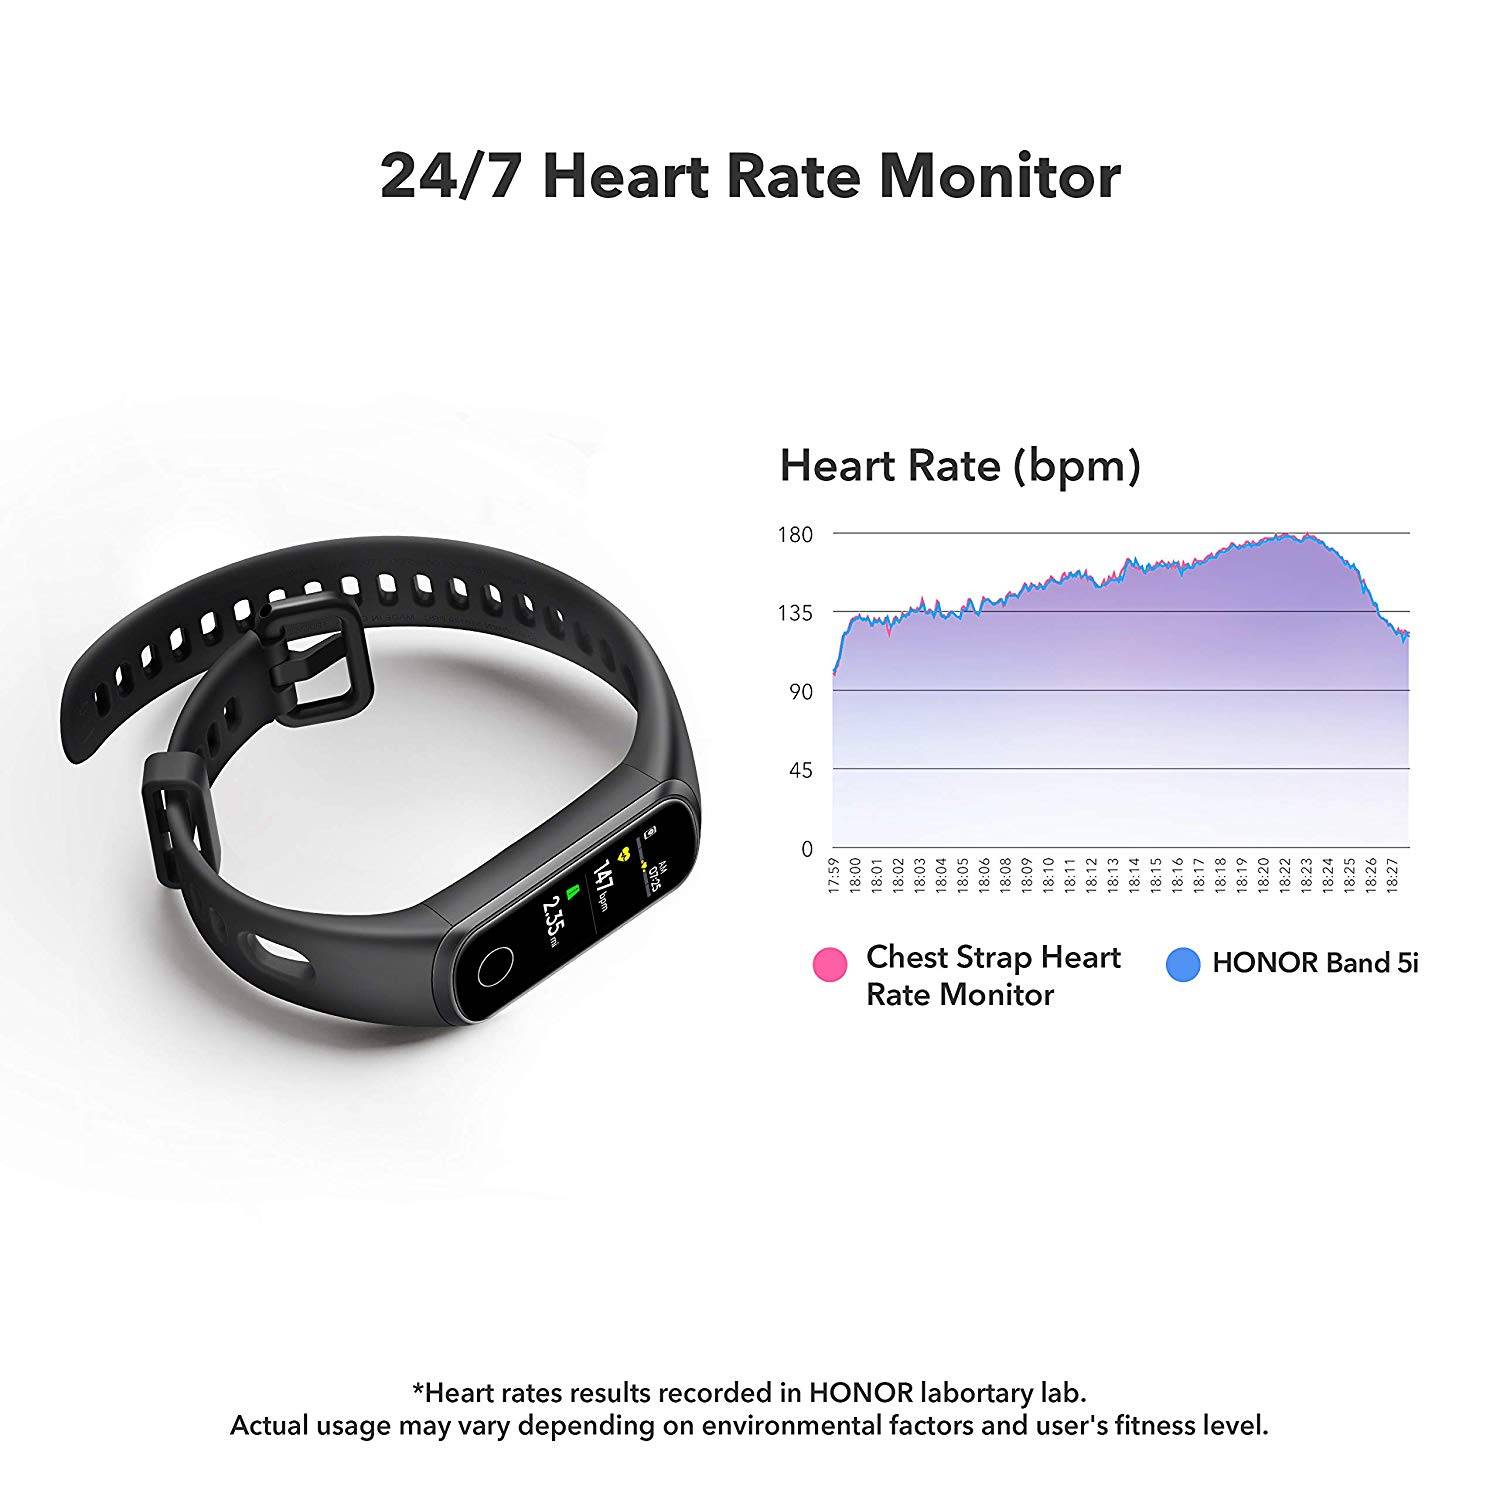 Round The Clock Heart Rate Monitoring